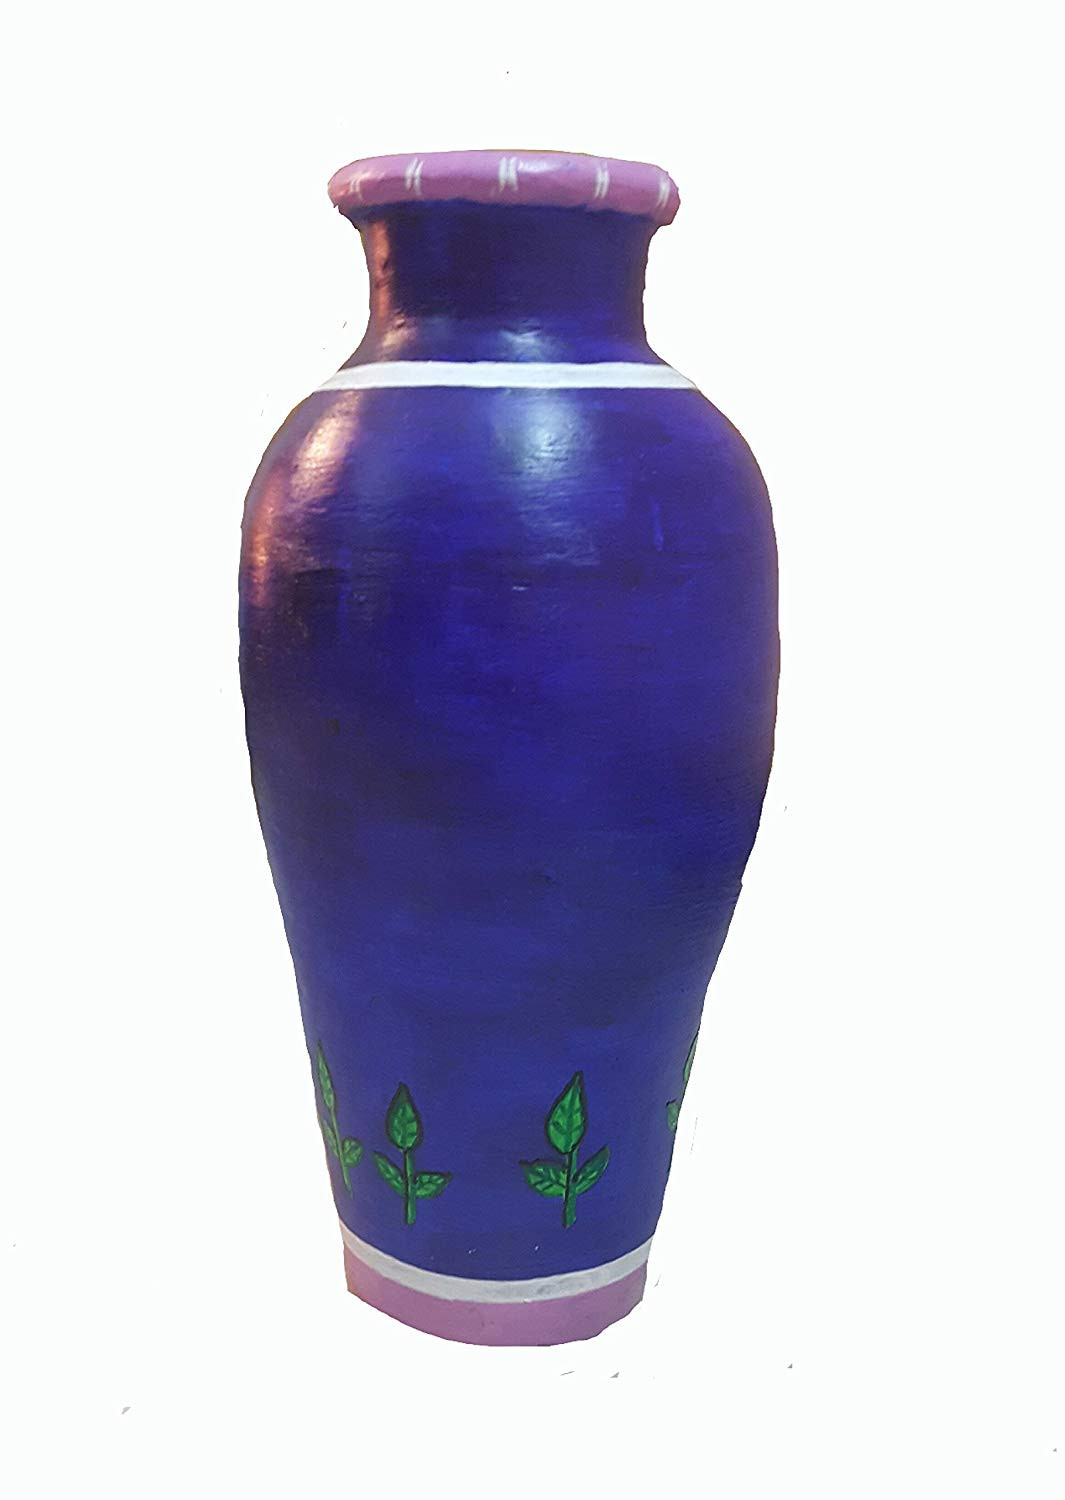 24 Great Large White Urn Vase 2023 free download large white urn vase of buy shree fine arts butterfly hand painted terracotta vase large throughout buy shree fine arts butterfly hand painted terracotta vase large online at low prices in i